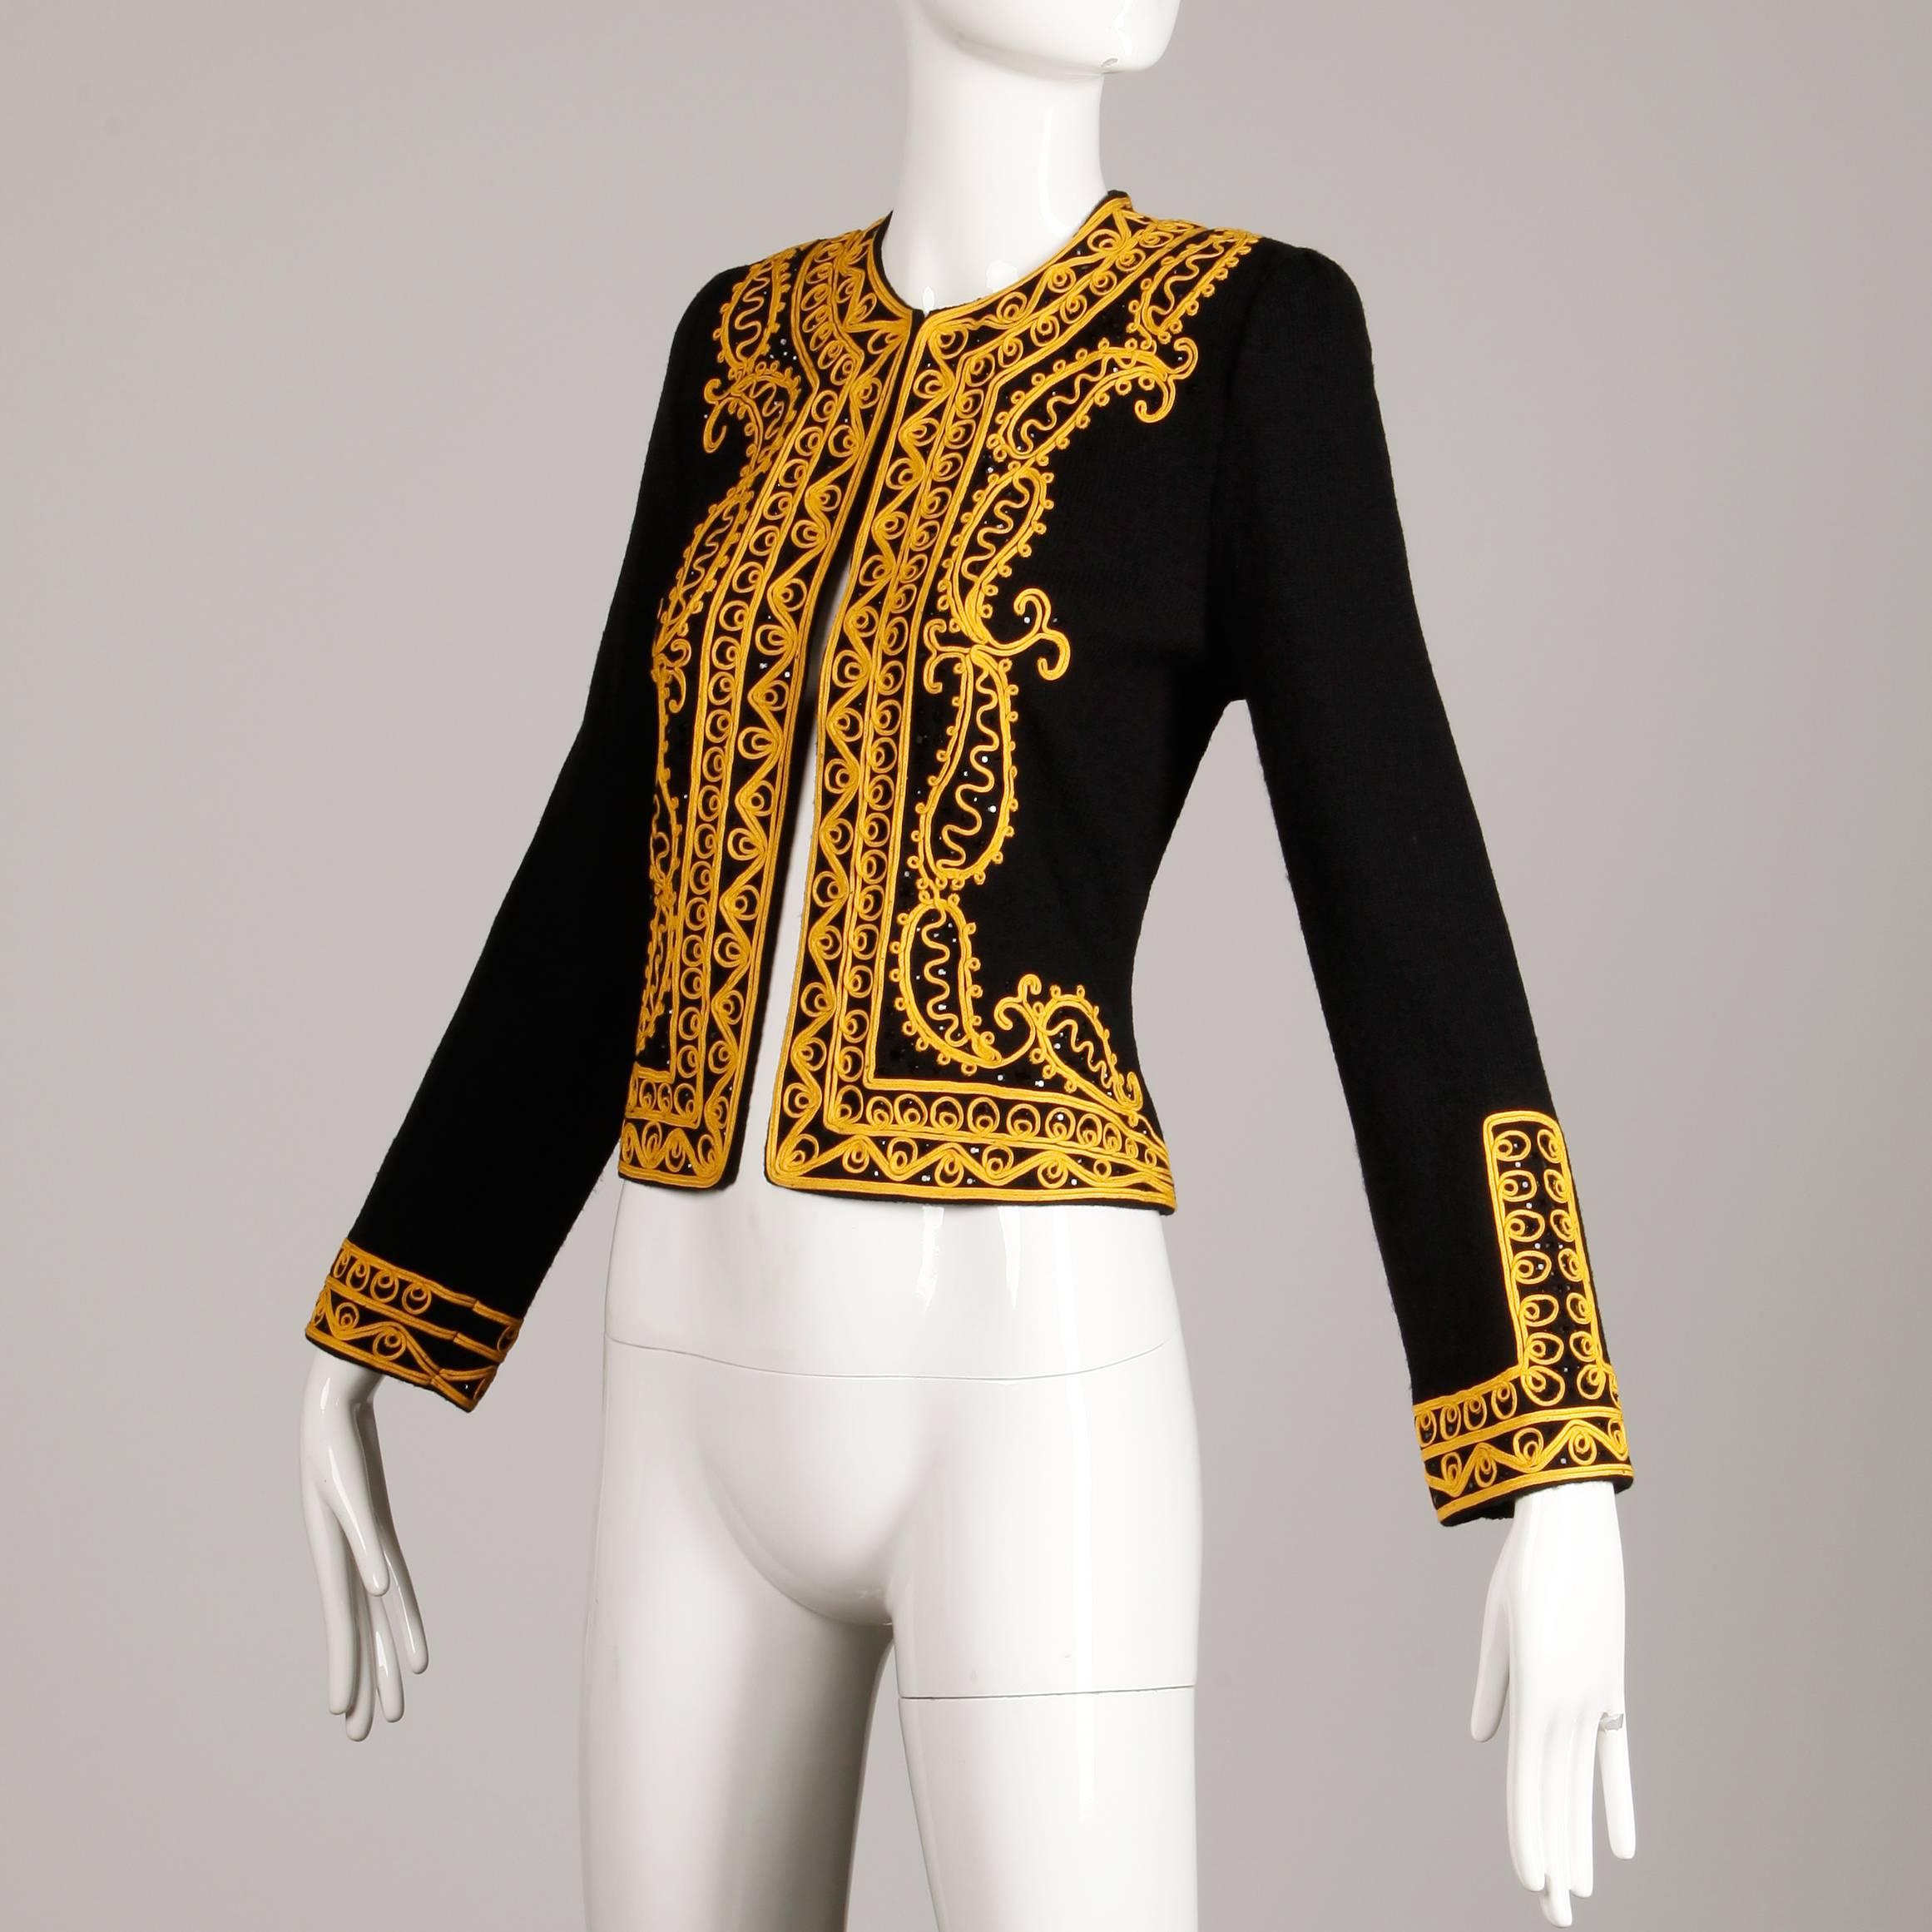 Military-inspired vintage knit cardigan sweater or jacket by Adolfo with gold soutache embroidery and beadwork. Unlined with front hook closure. External shoulder pads can easily be removed if desired. 70% wool, 30% rayon. Fits like a modern size